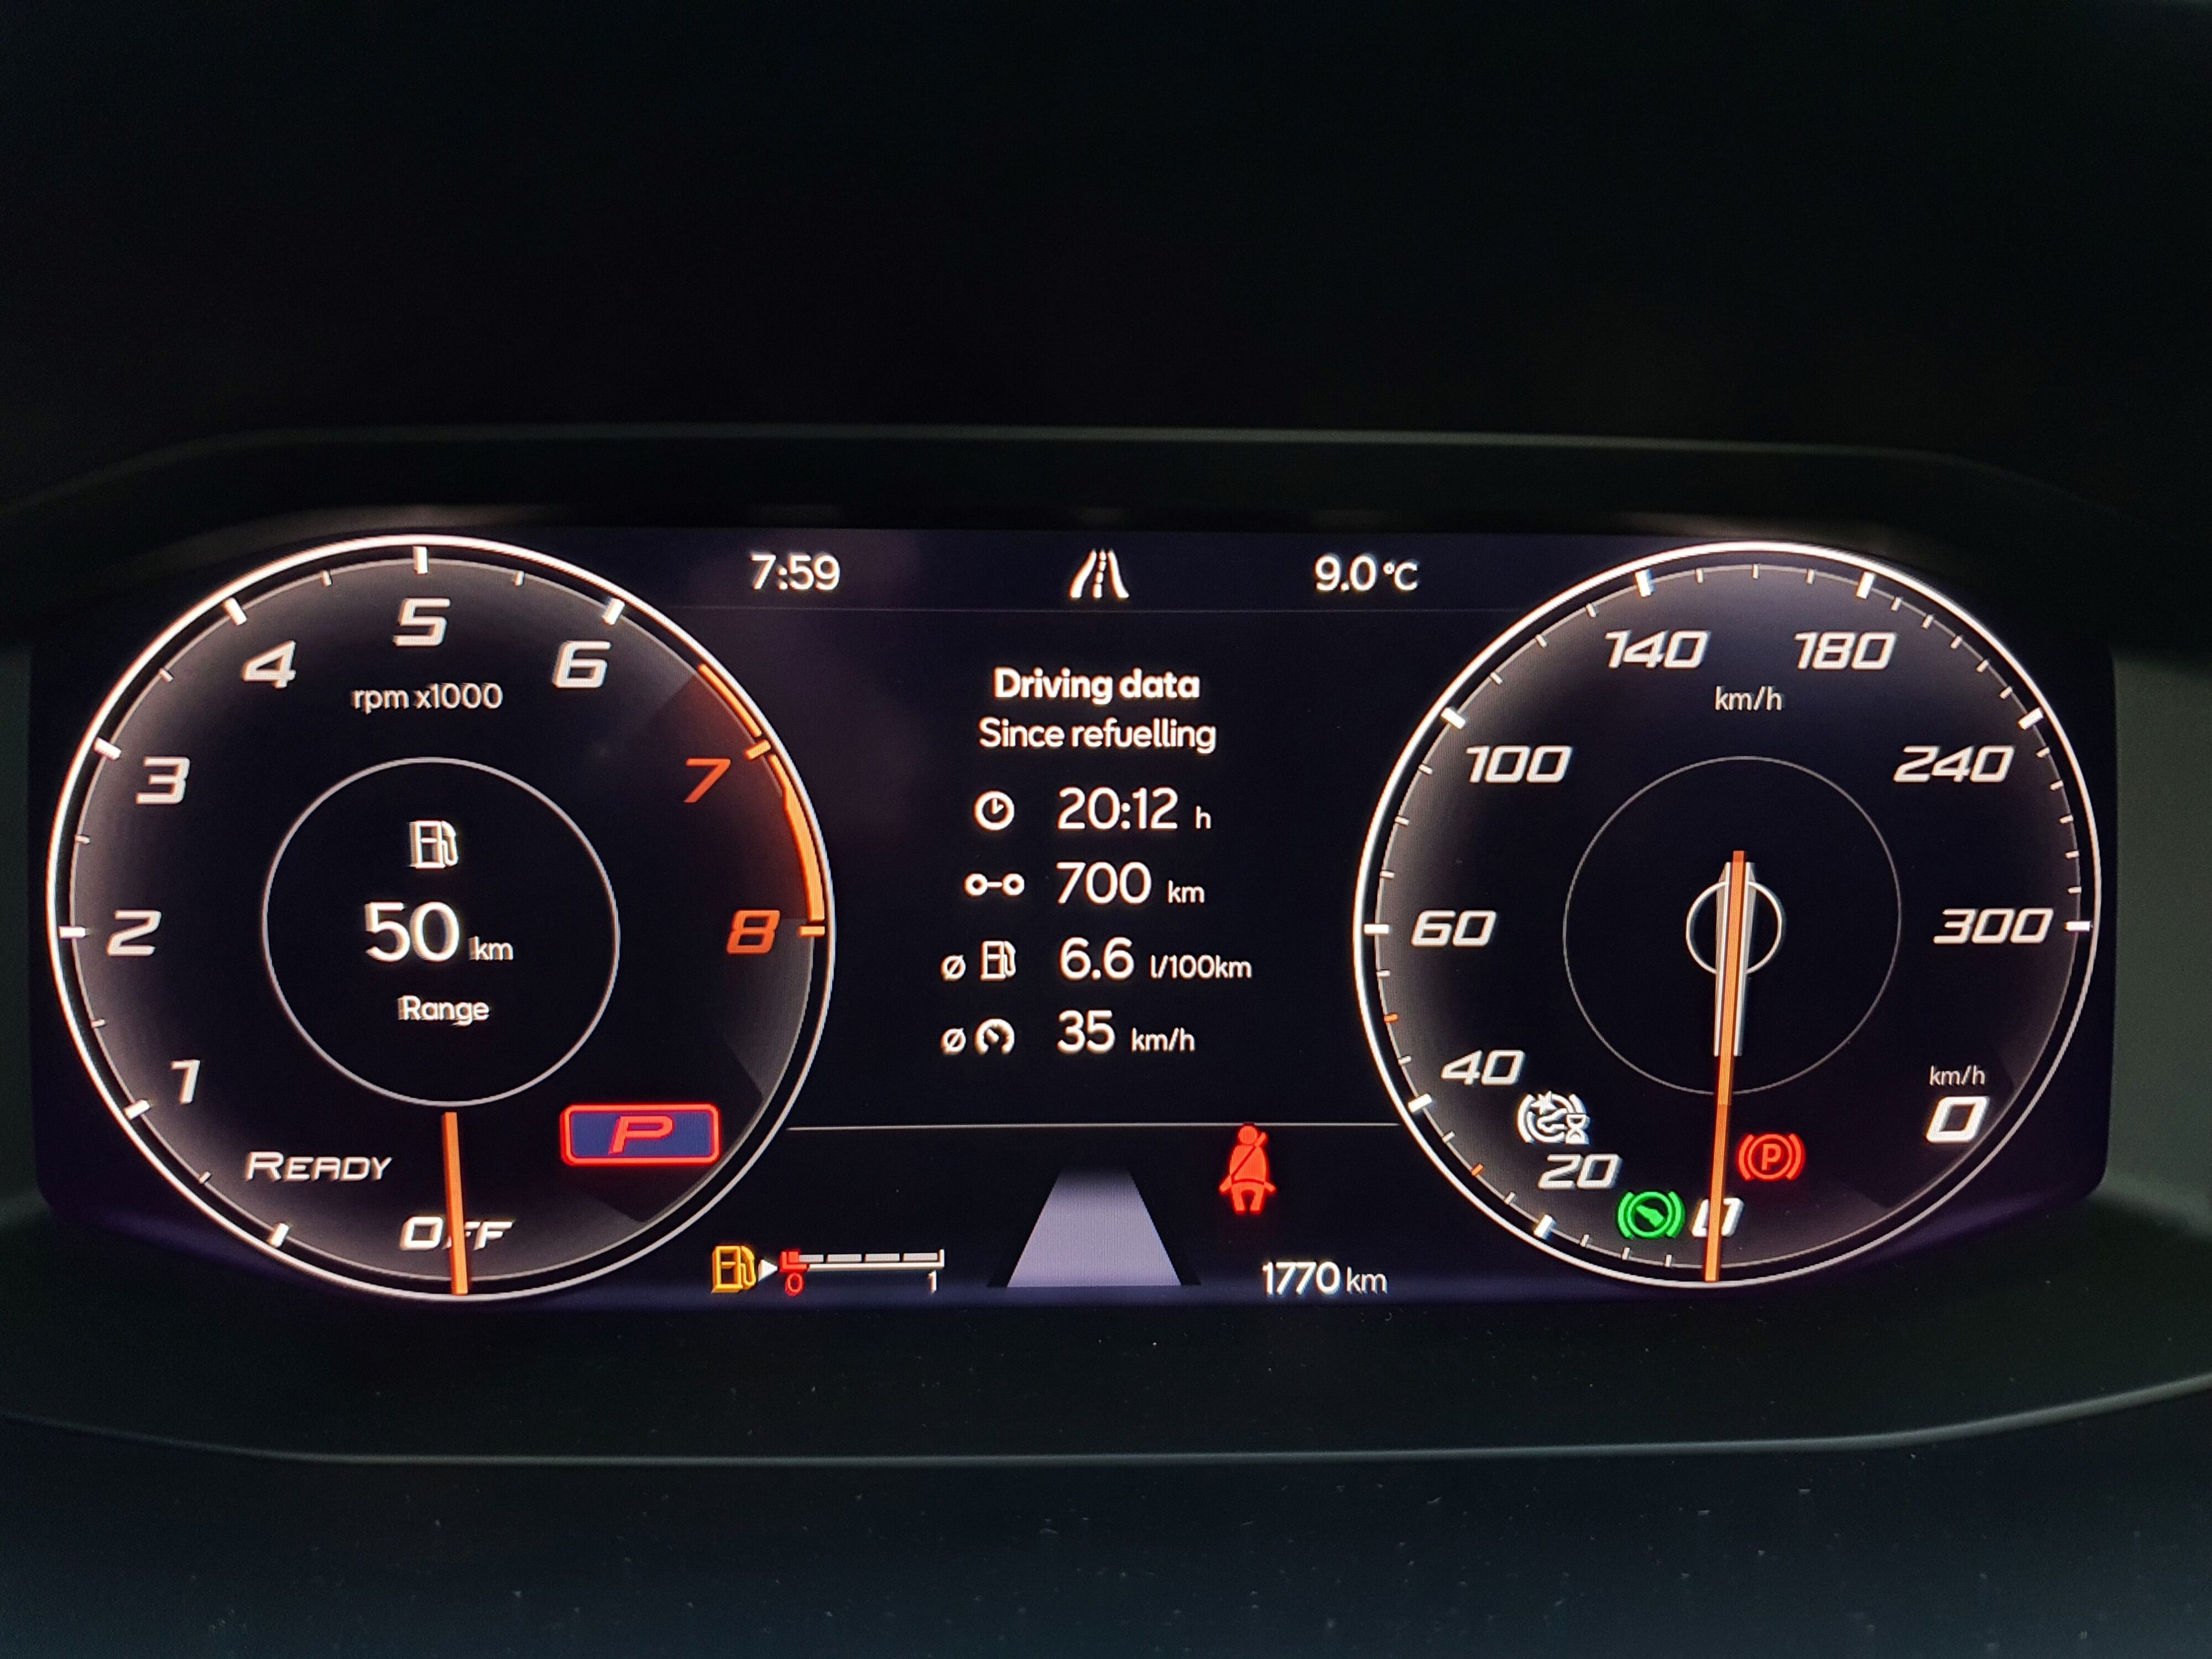 View of the digital instrument cluster on a 2023 Cupra Leon V Sports Tourer.